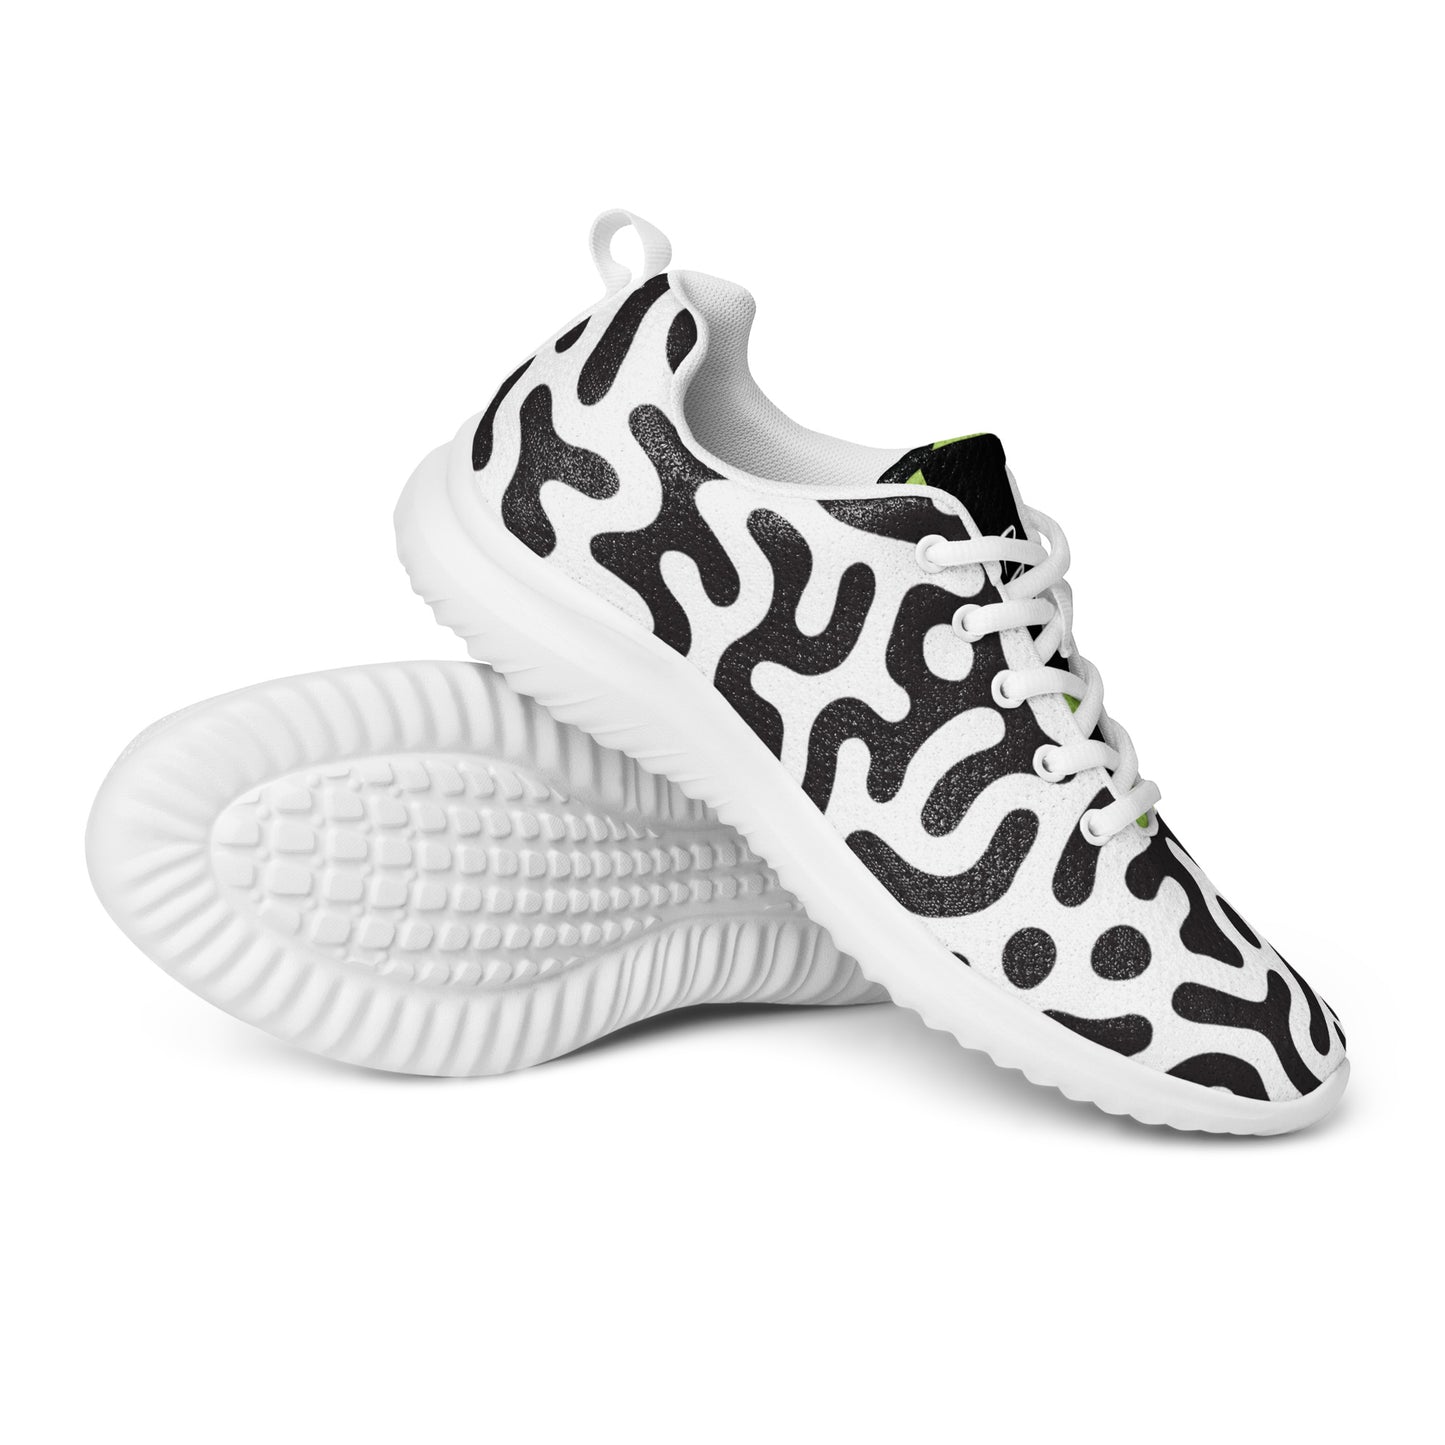 Women’s athletic shoes zebra green tiger